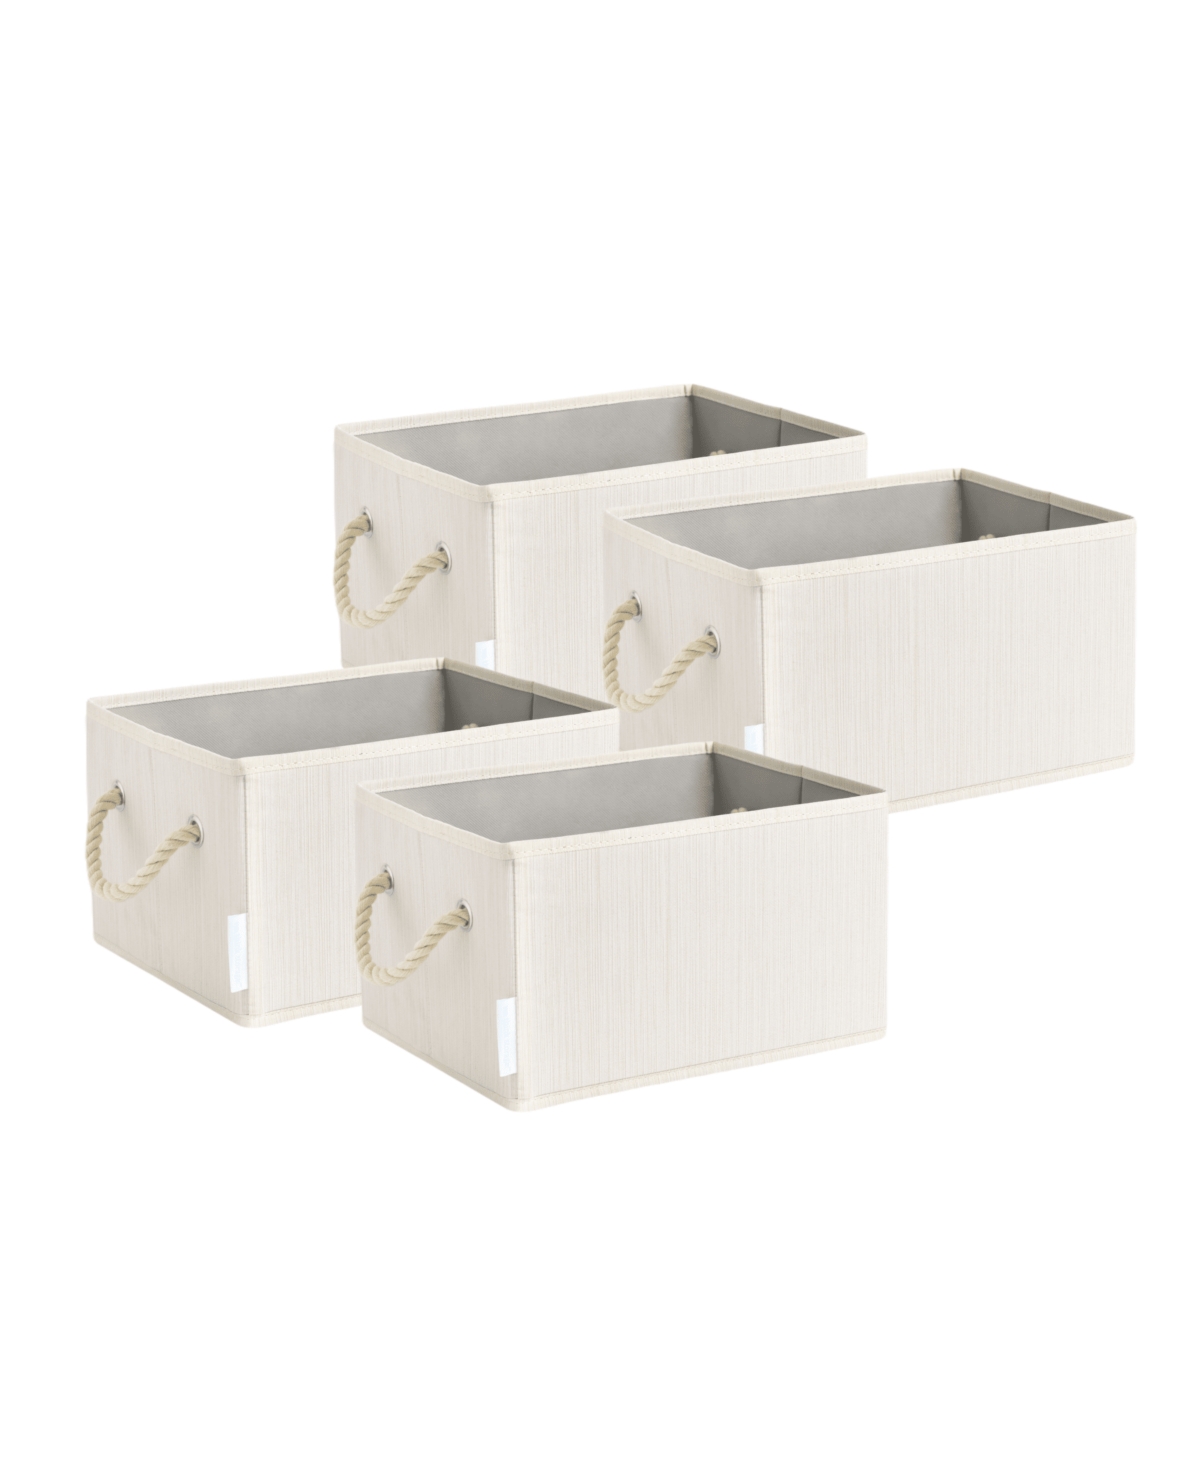 Wethinkstorage 11 Litre Collapsible Fabric Storage Bins With Cotton Rope Handles, Set Of 4 In Ivory